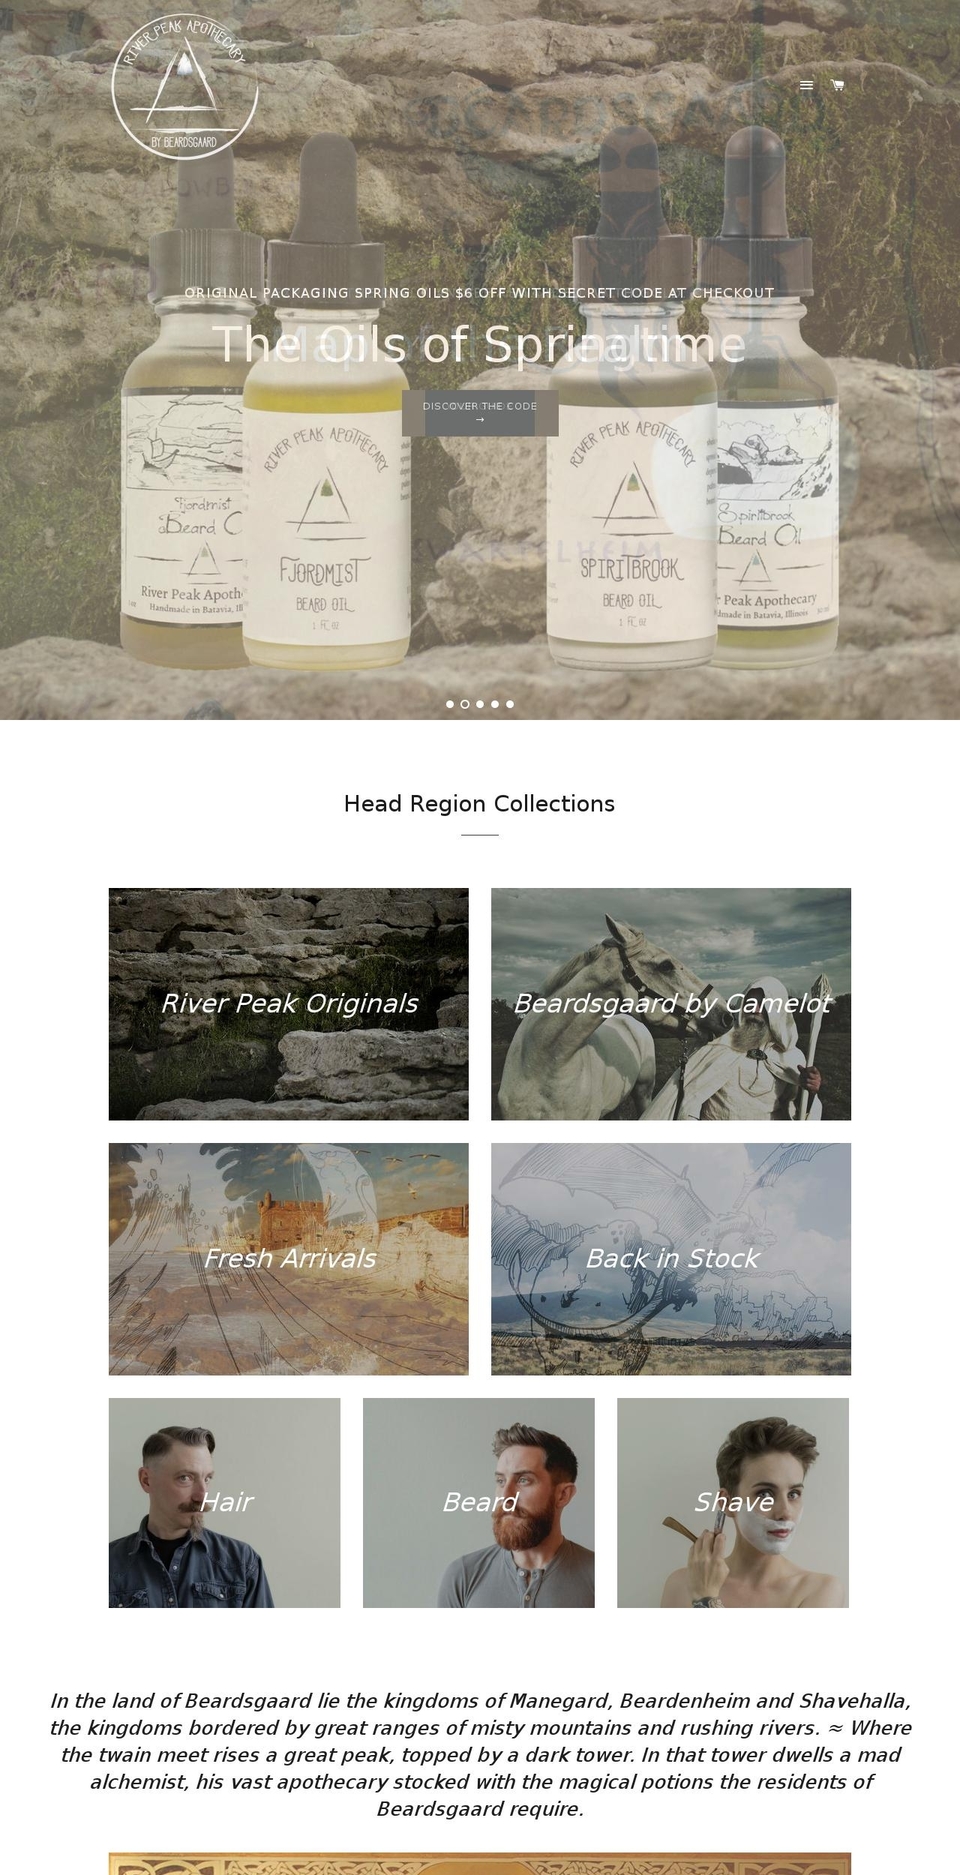 Mr Parker Shopify theme site example riverpeakapothecary.com